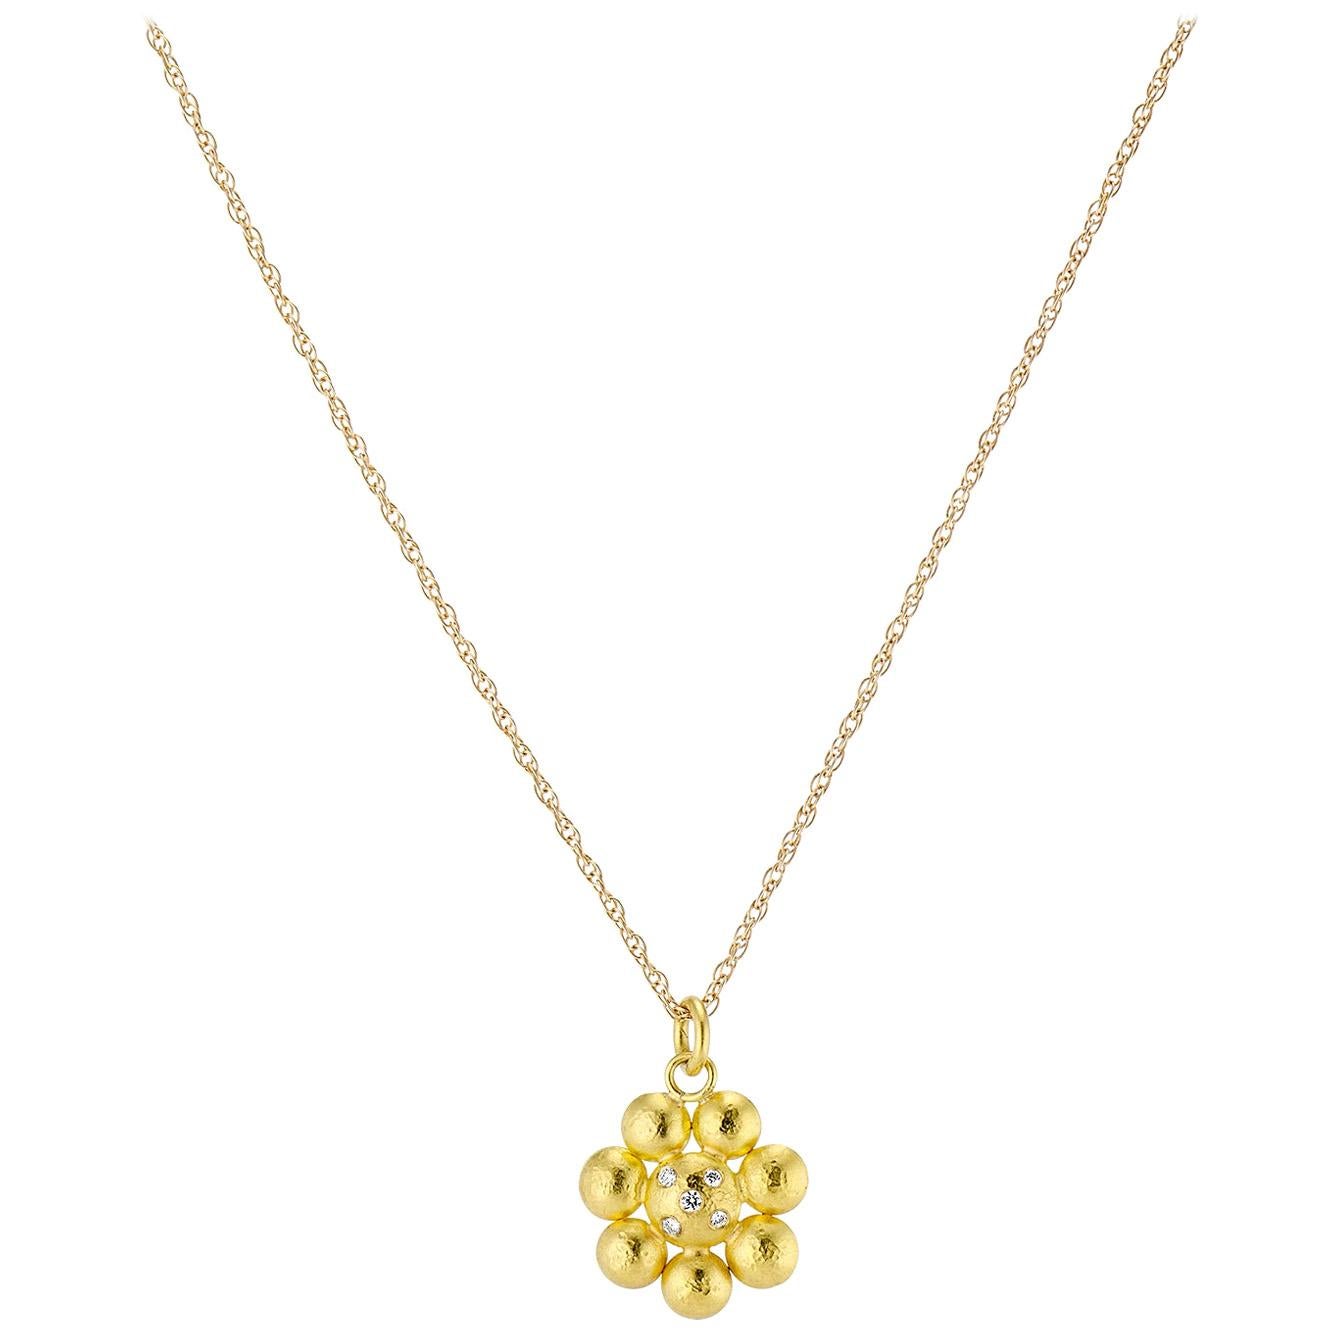 Diamond and Yellow Gold Rosette Flower Charm Pendant Necklace, Yellow Gold Chain For Sale